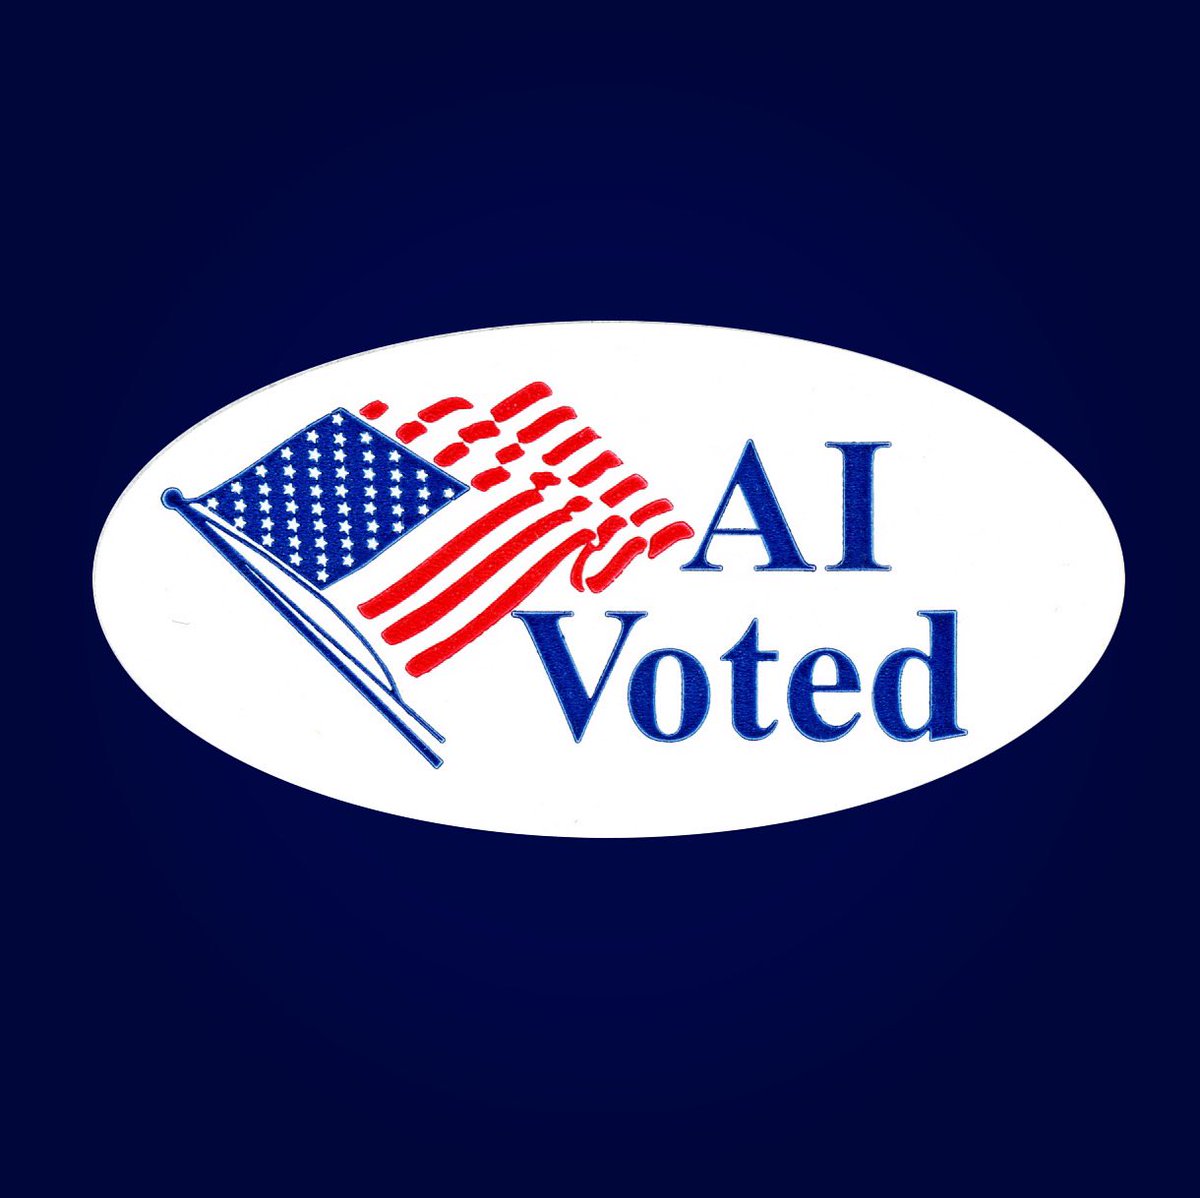 It’s gonna be an interesting year. #graphicdesign #commentary #vote #election2024 #AI